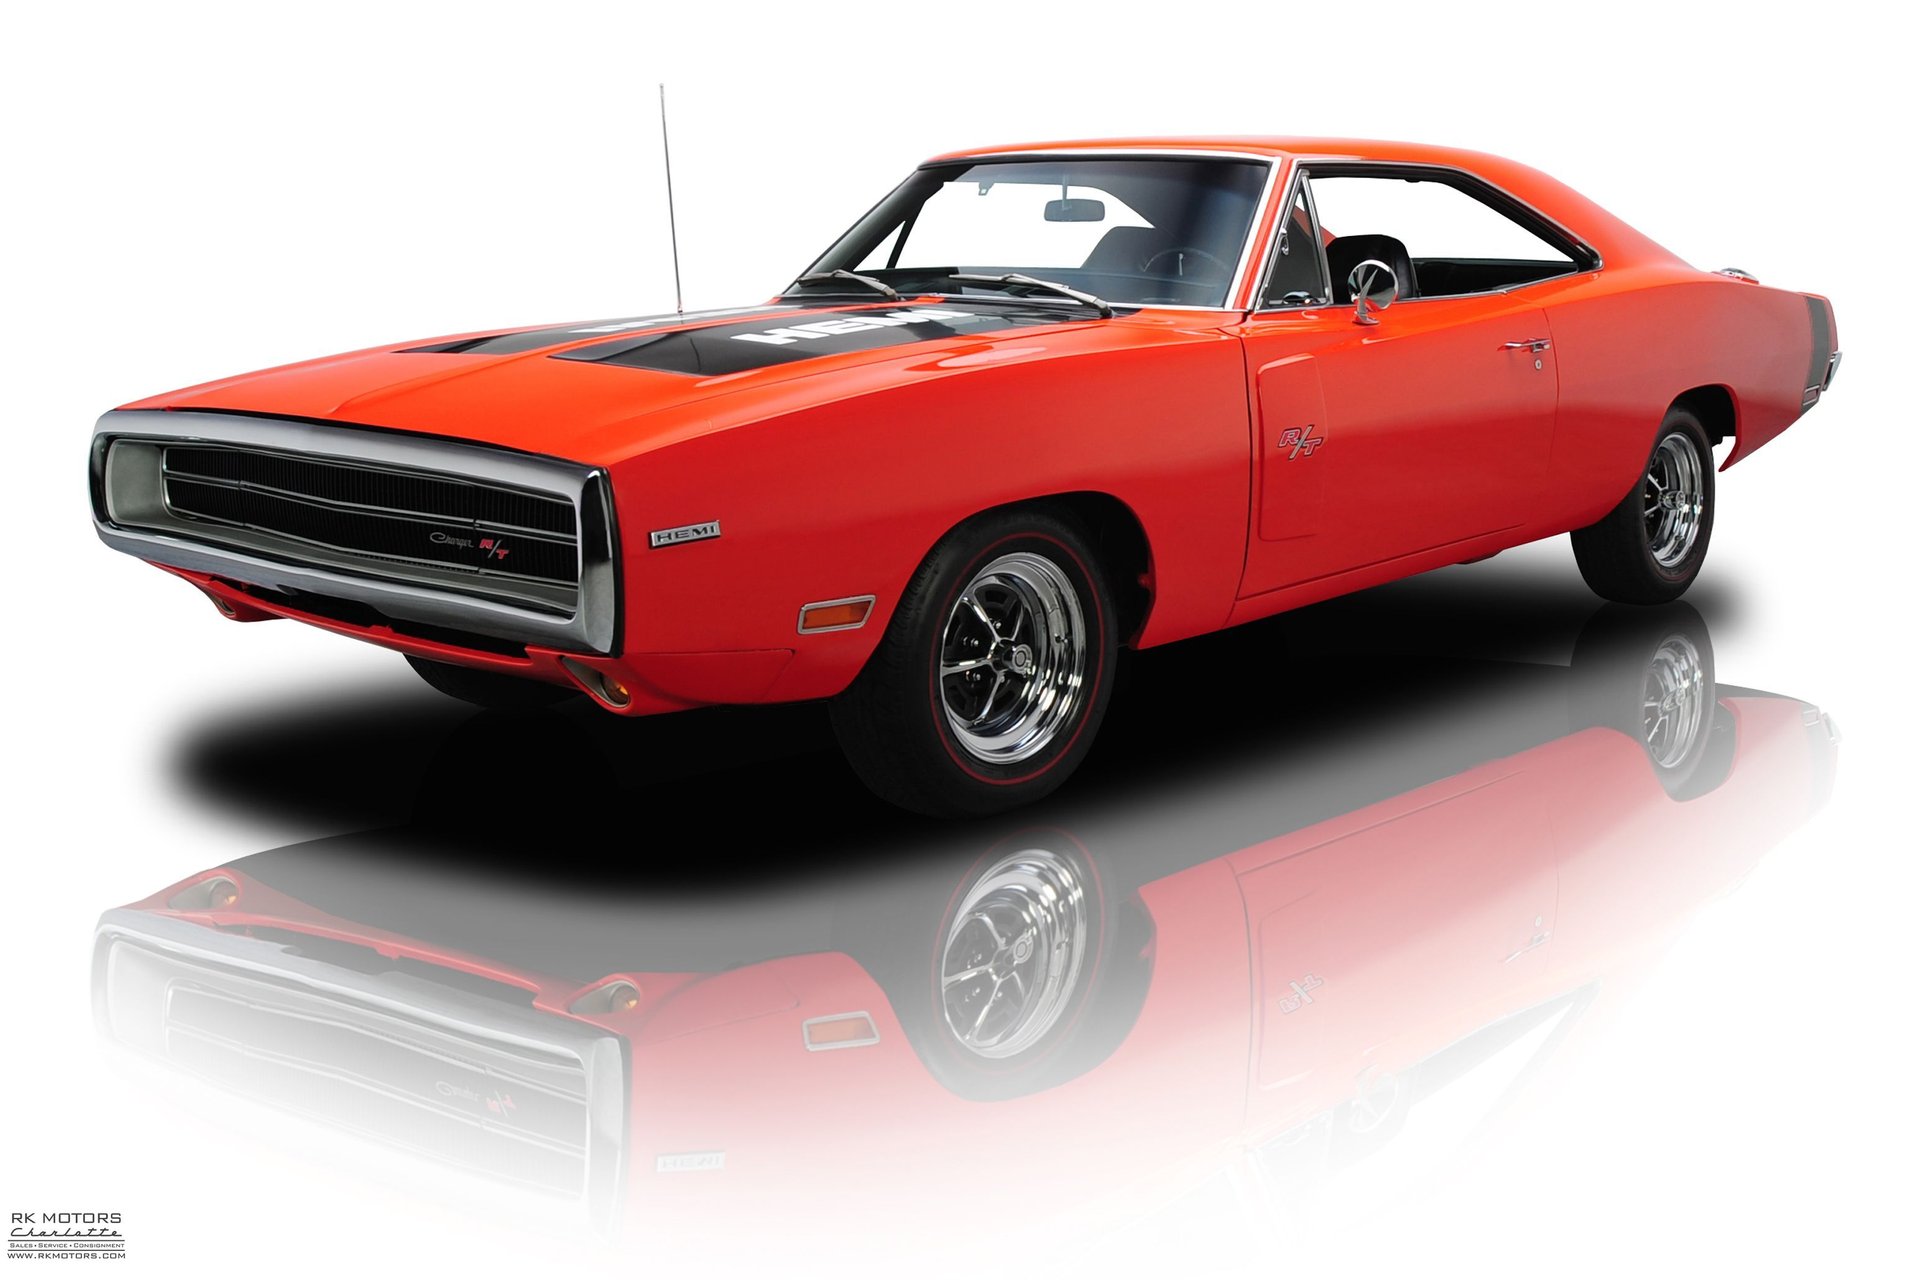 132956 1970 Dodge Charger RK Motors Classic Cars and Muscle Cars for Sale